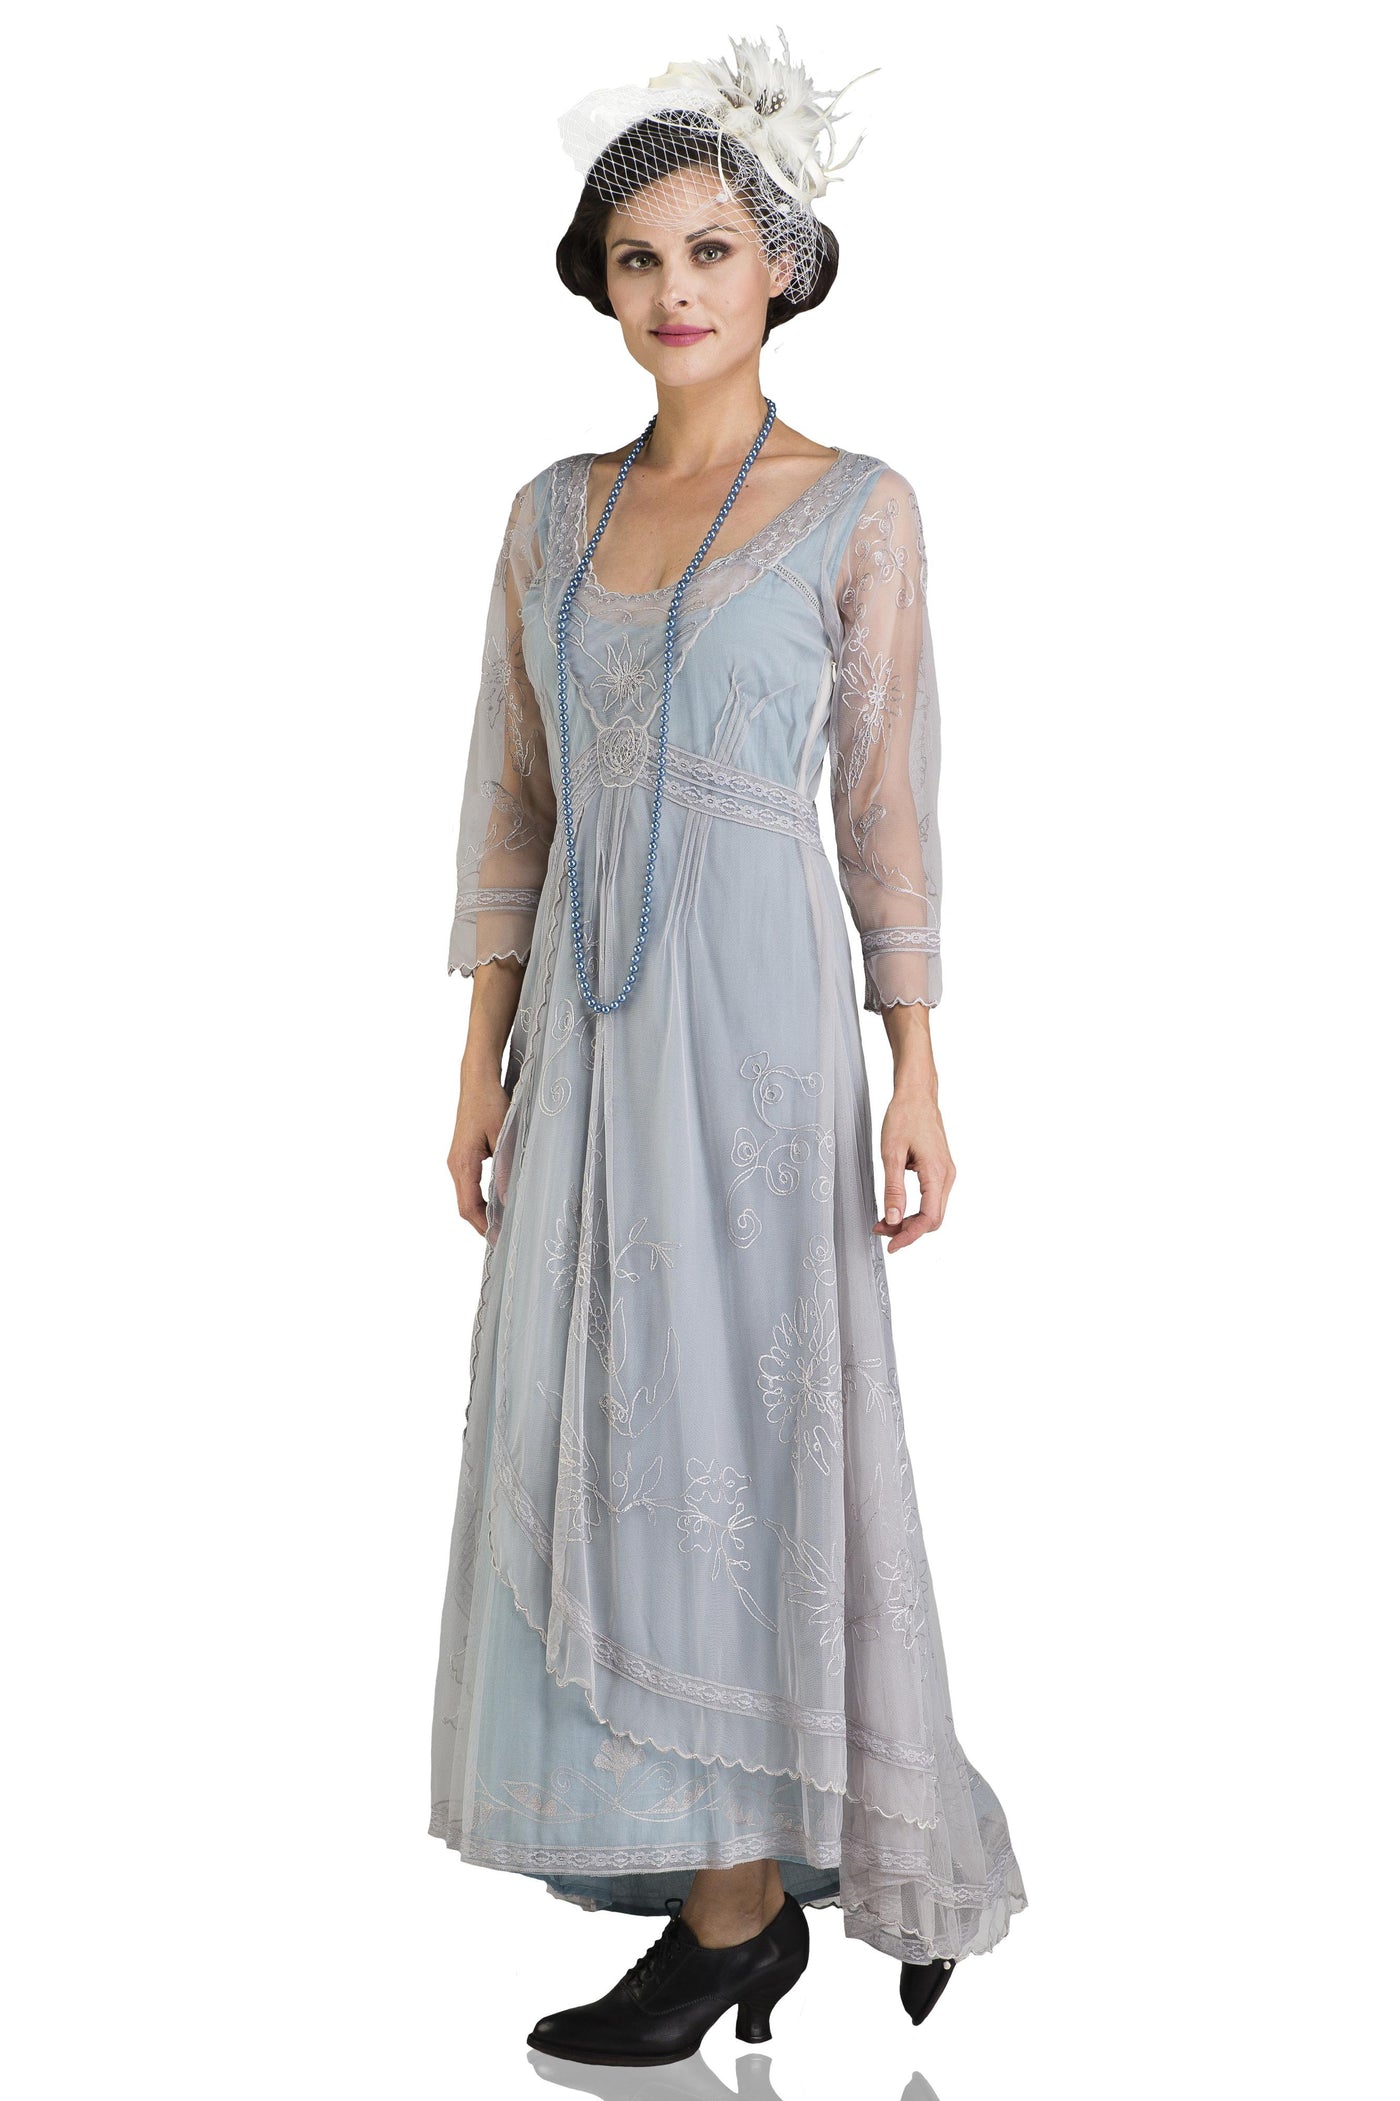 Downton Abbey Tea Party Gown 40163 in Sunrise by Nataya